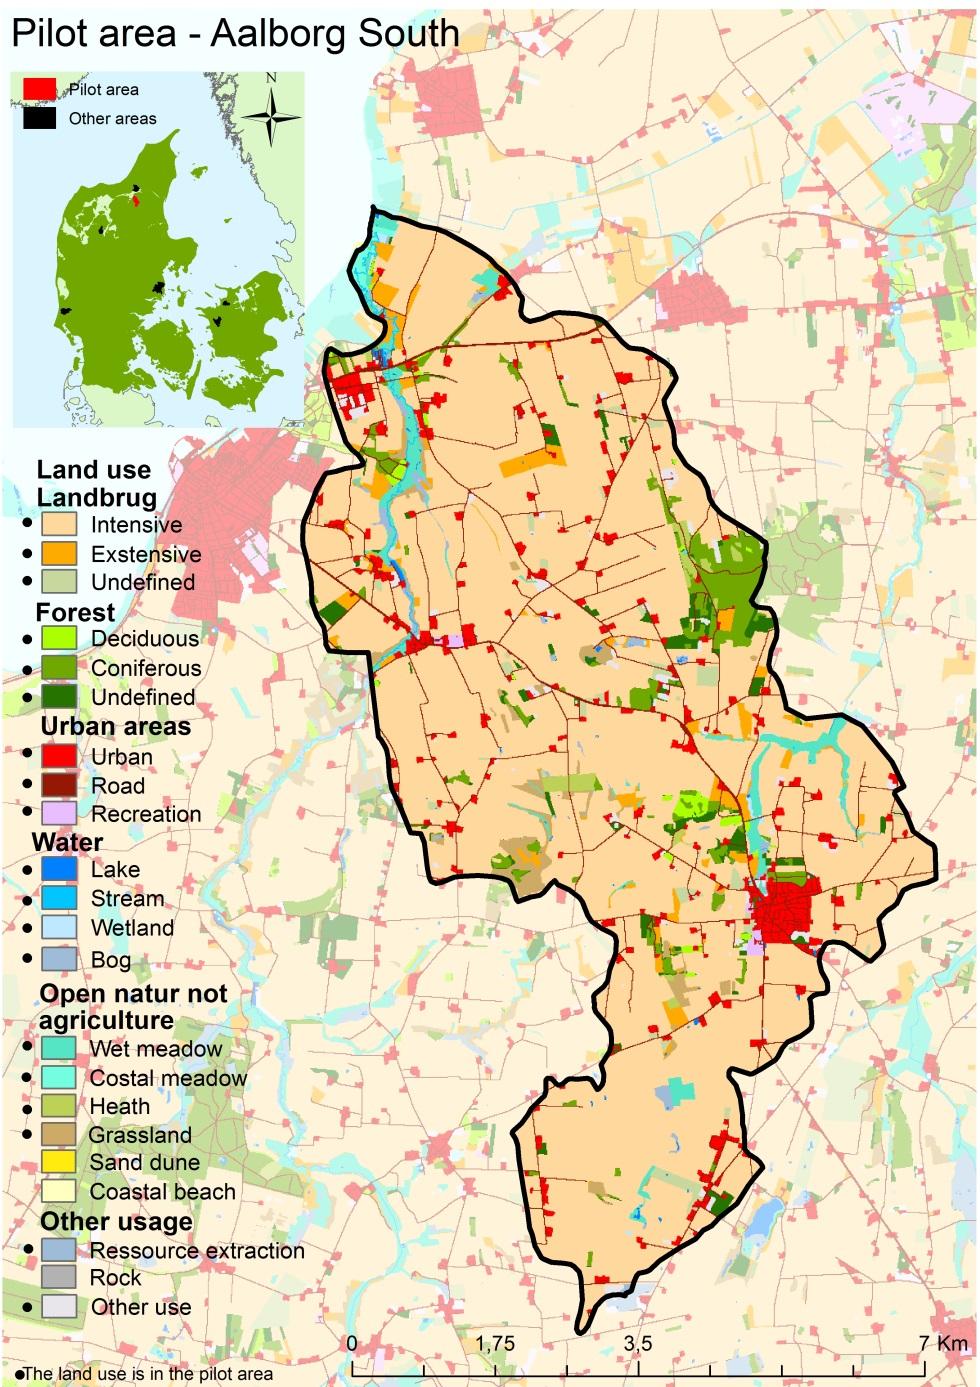 2.1. Land use The main land use in Aalborg south is agriculture (78.8 %) followed by nature areas outside agriculture such as forest, open nature, and water (11.7 %) and urban areas (8.